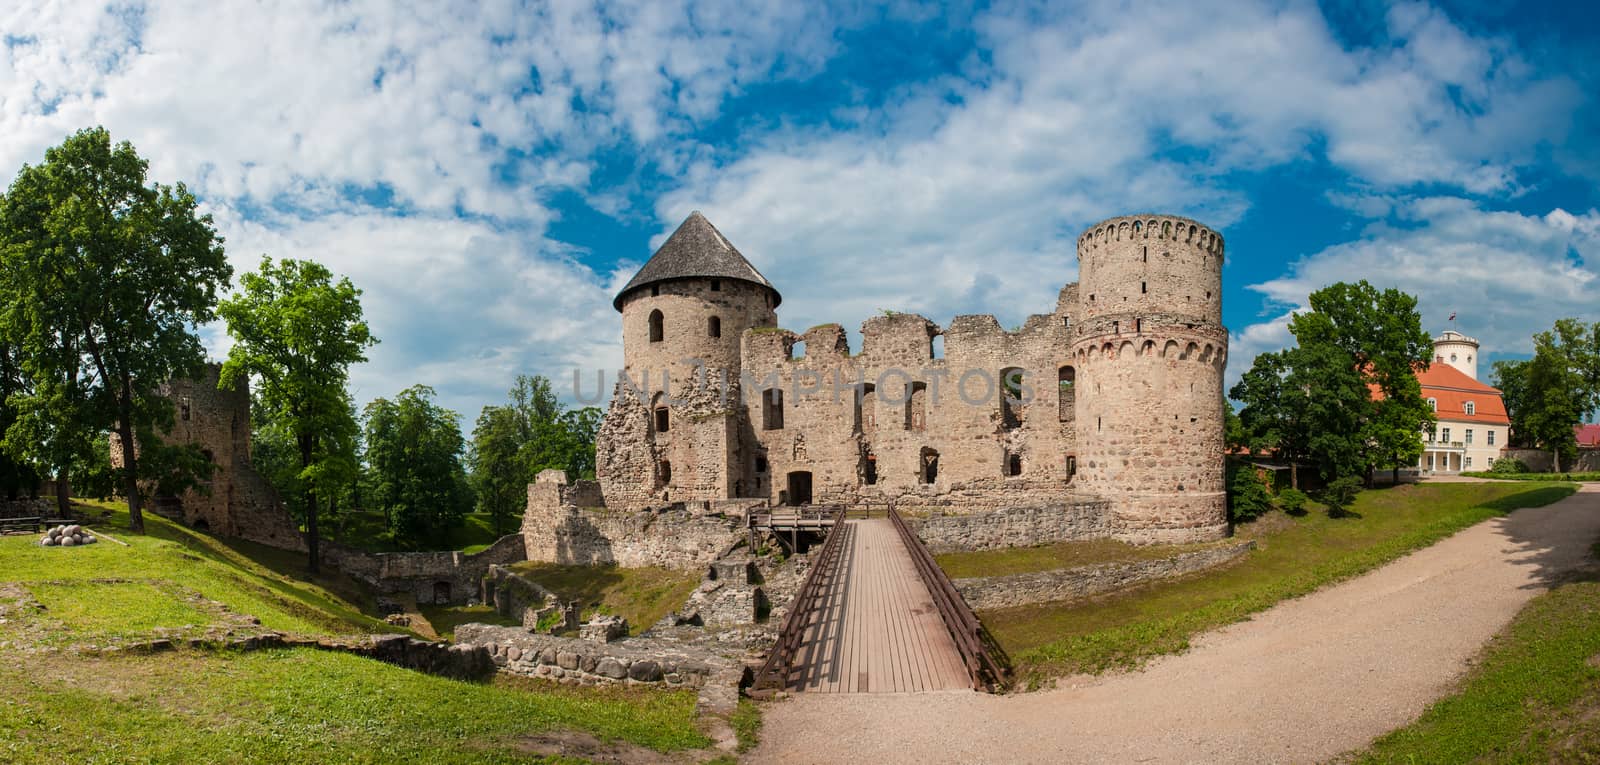 Castle in Cesis by fyletto